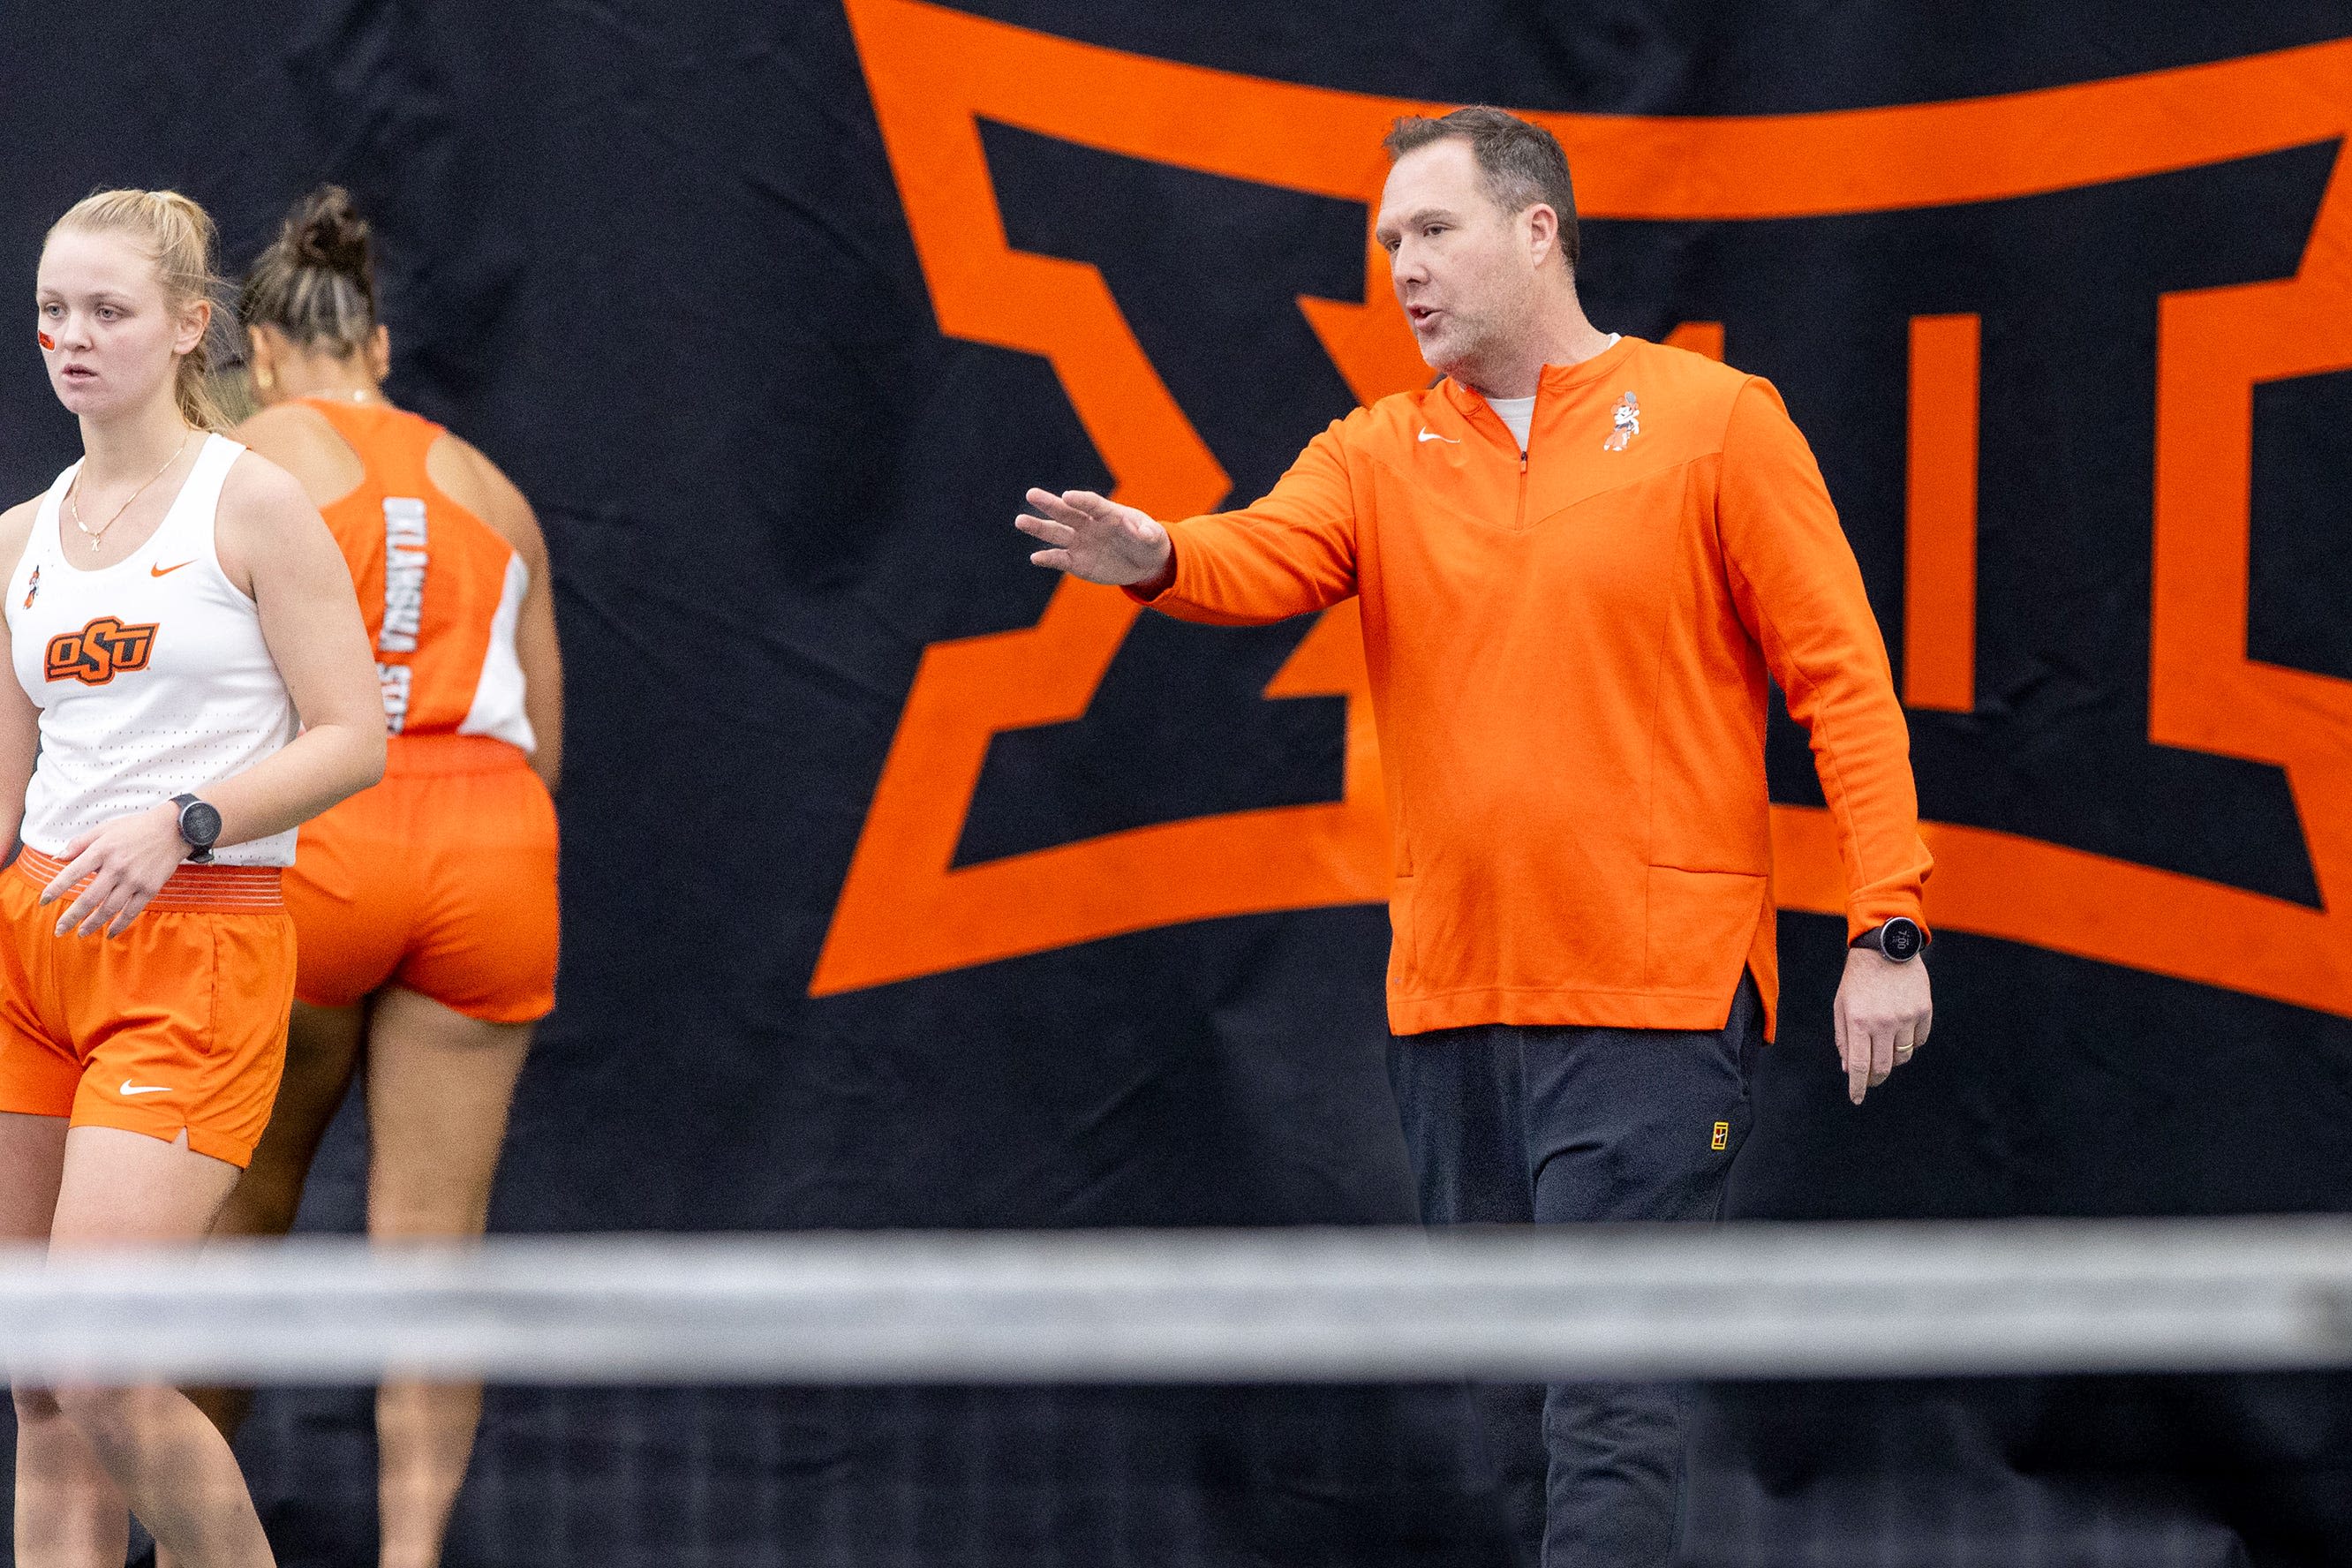 How dreaming the impossible led Oklahoma State tennis to hosting NCAA Championships